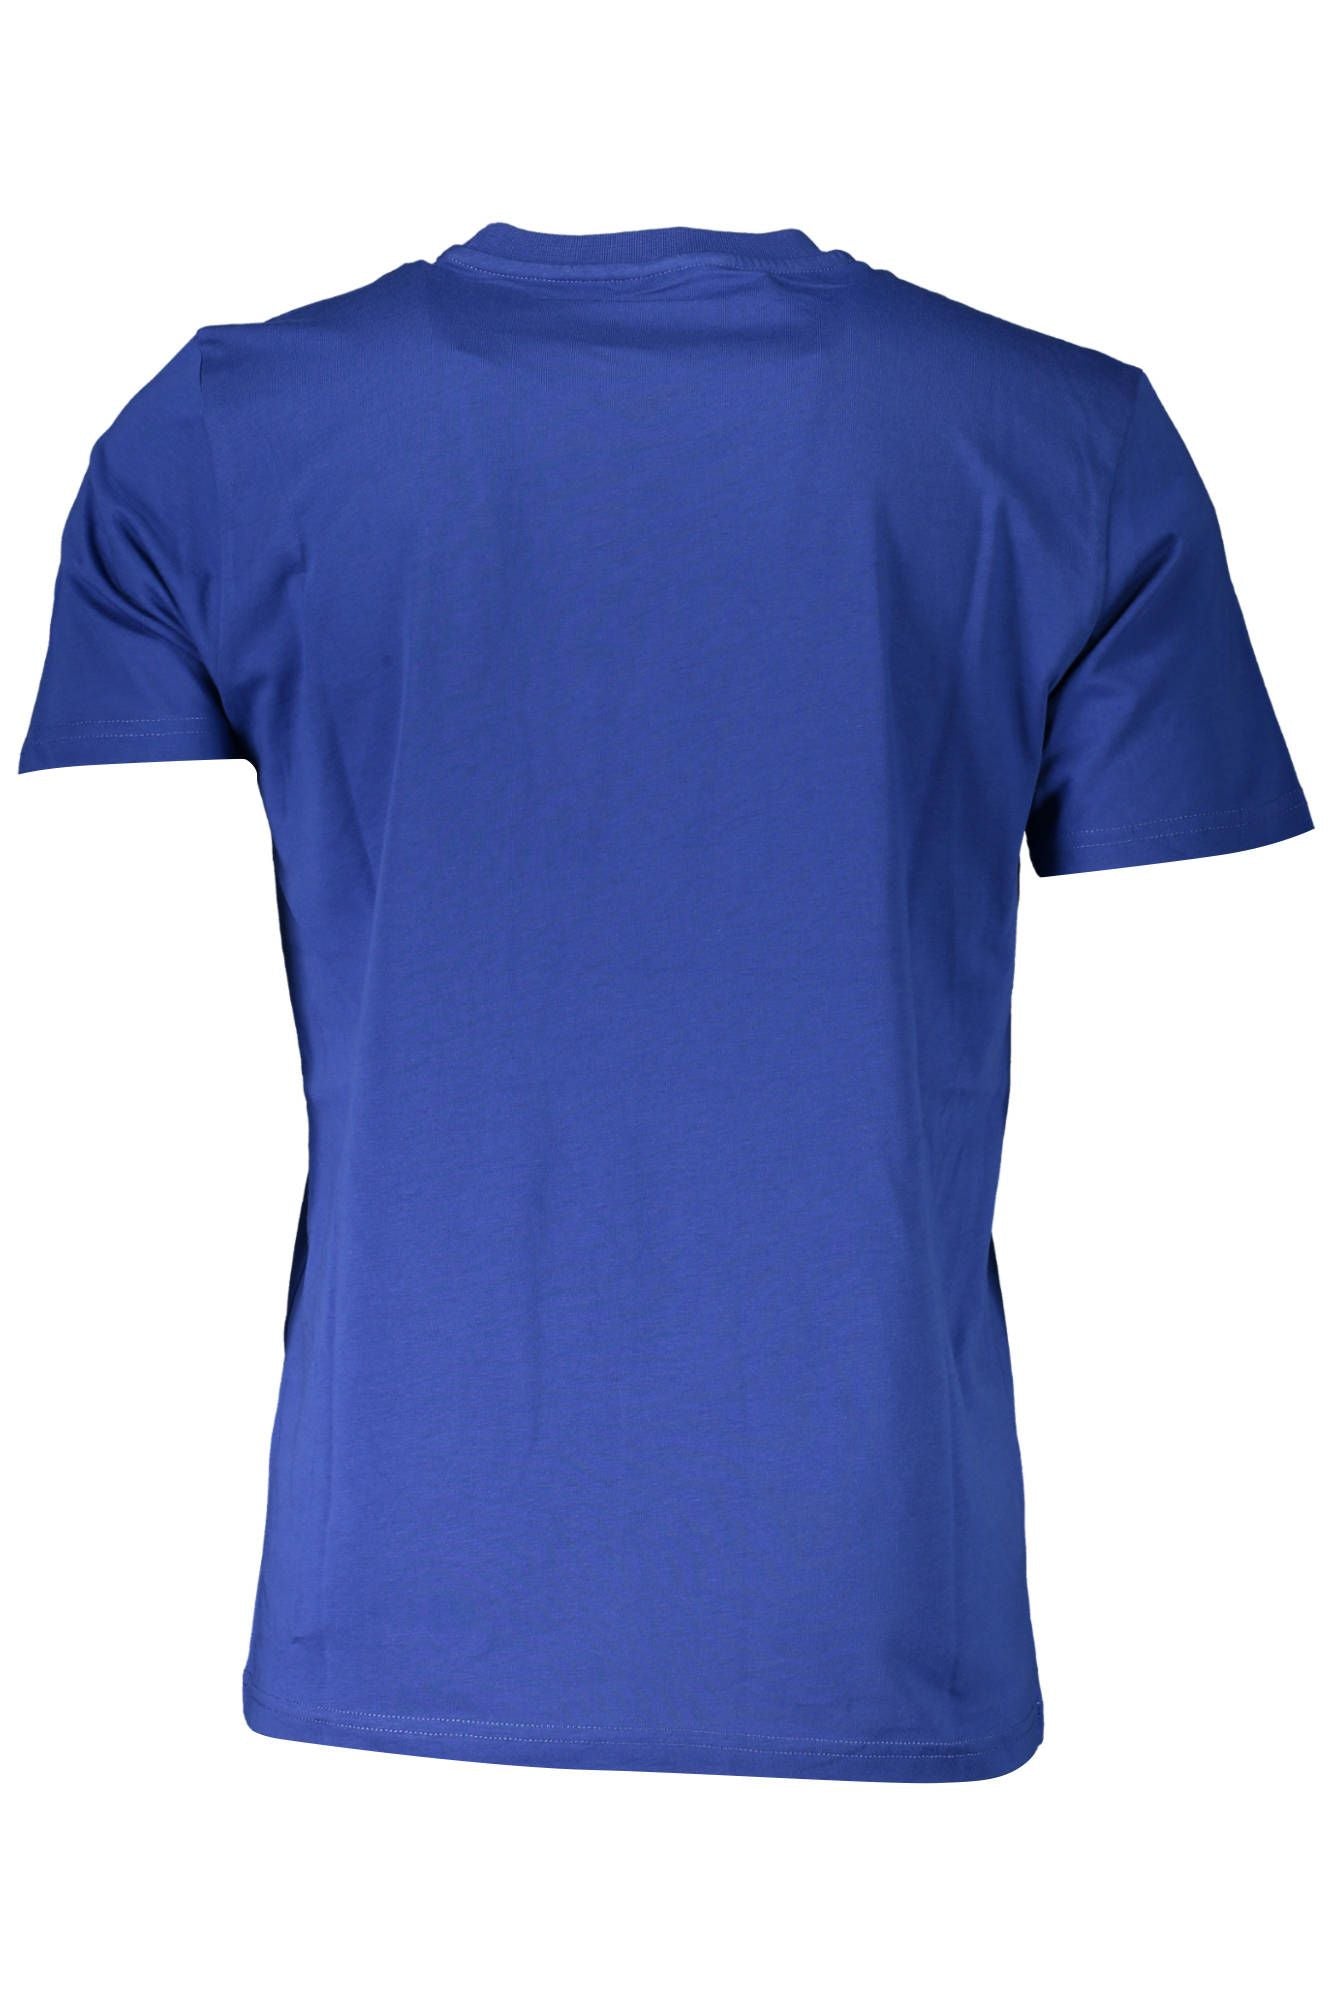 Chic Blue Cotton Tee with Signature Print